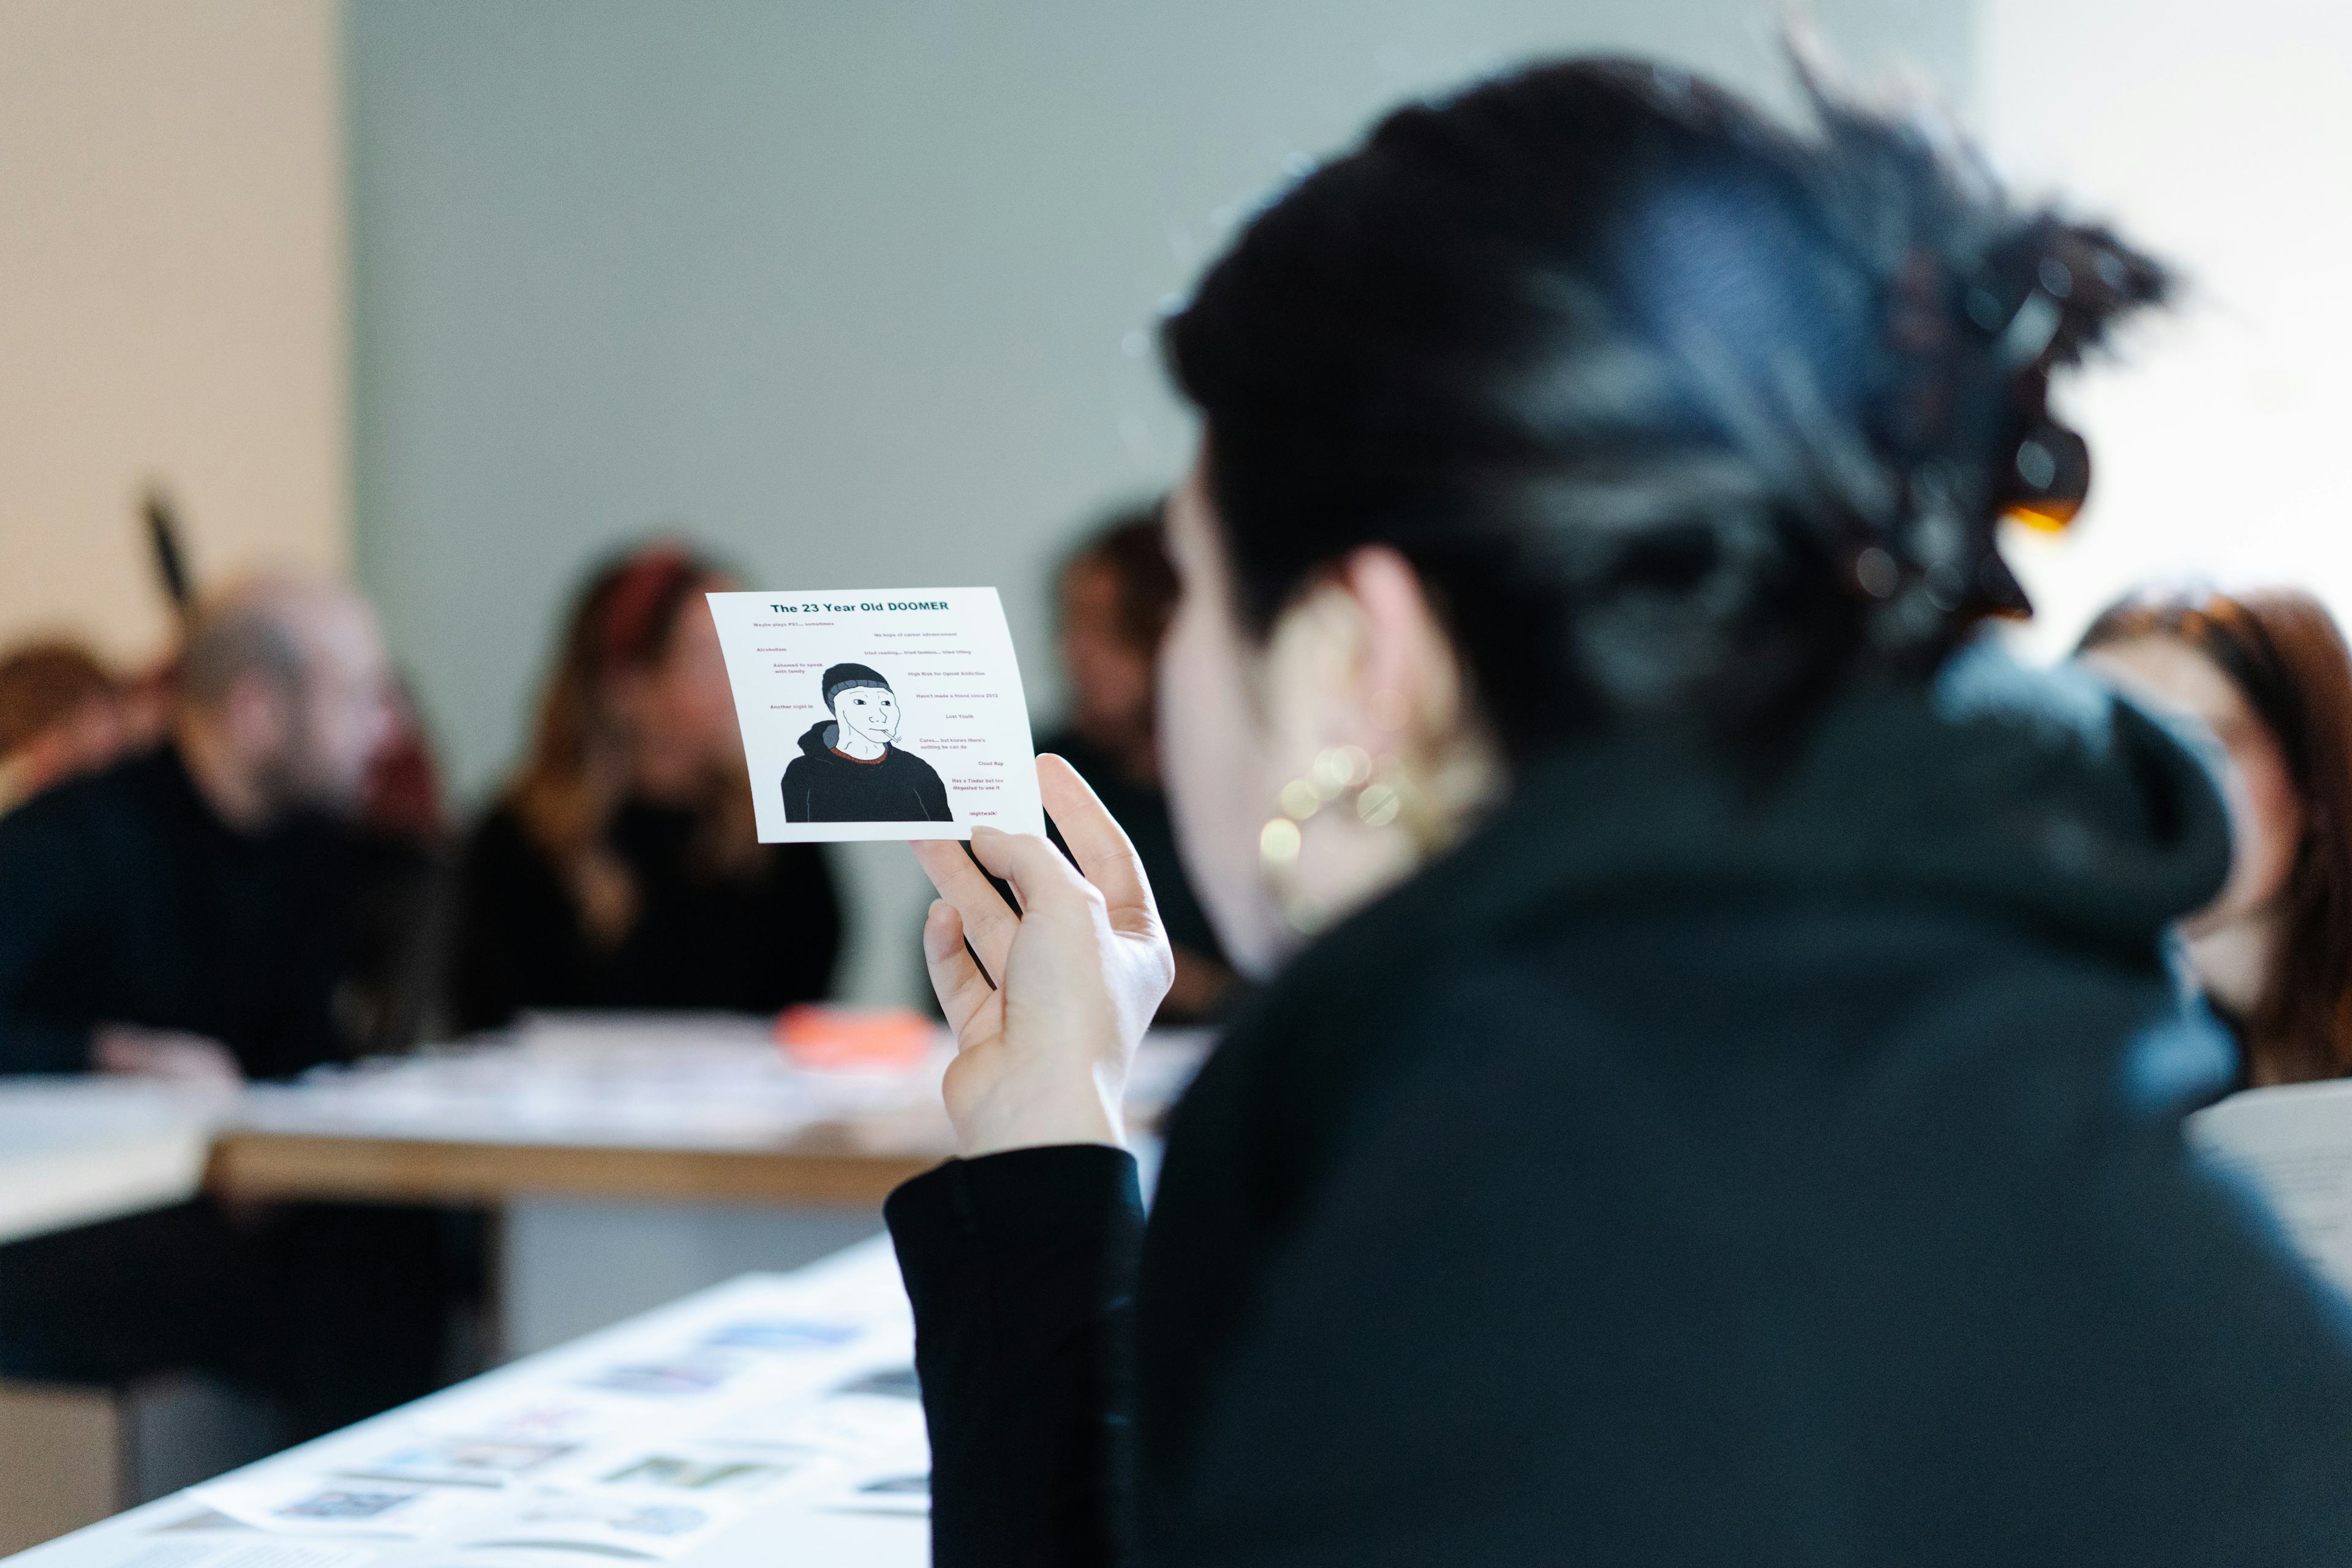 A photo of a girl holding a paper with a popular meme on it during a workshop